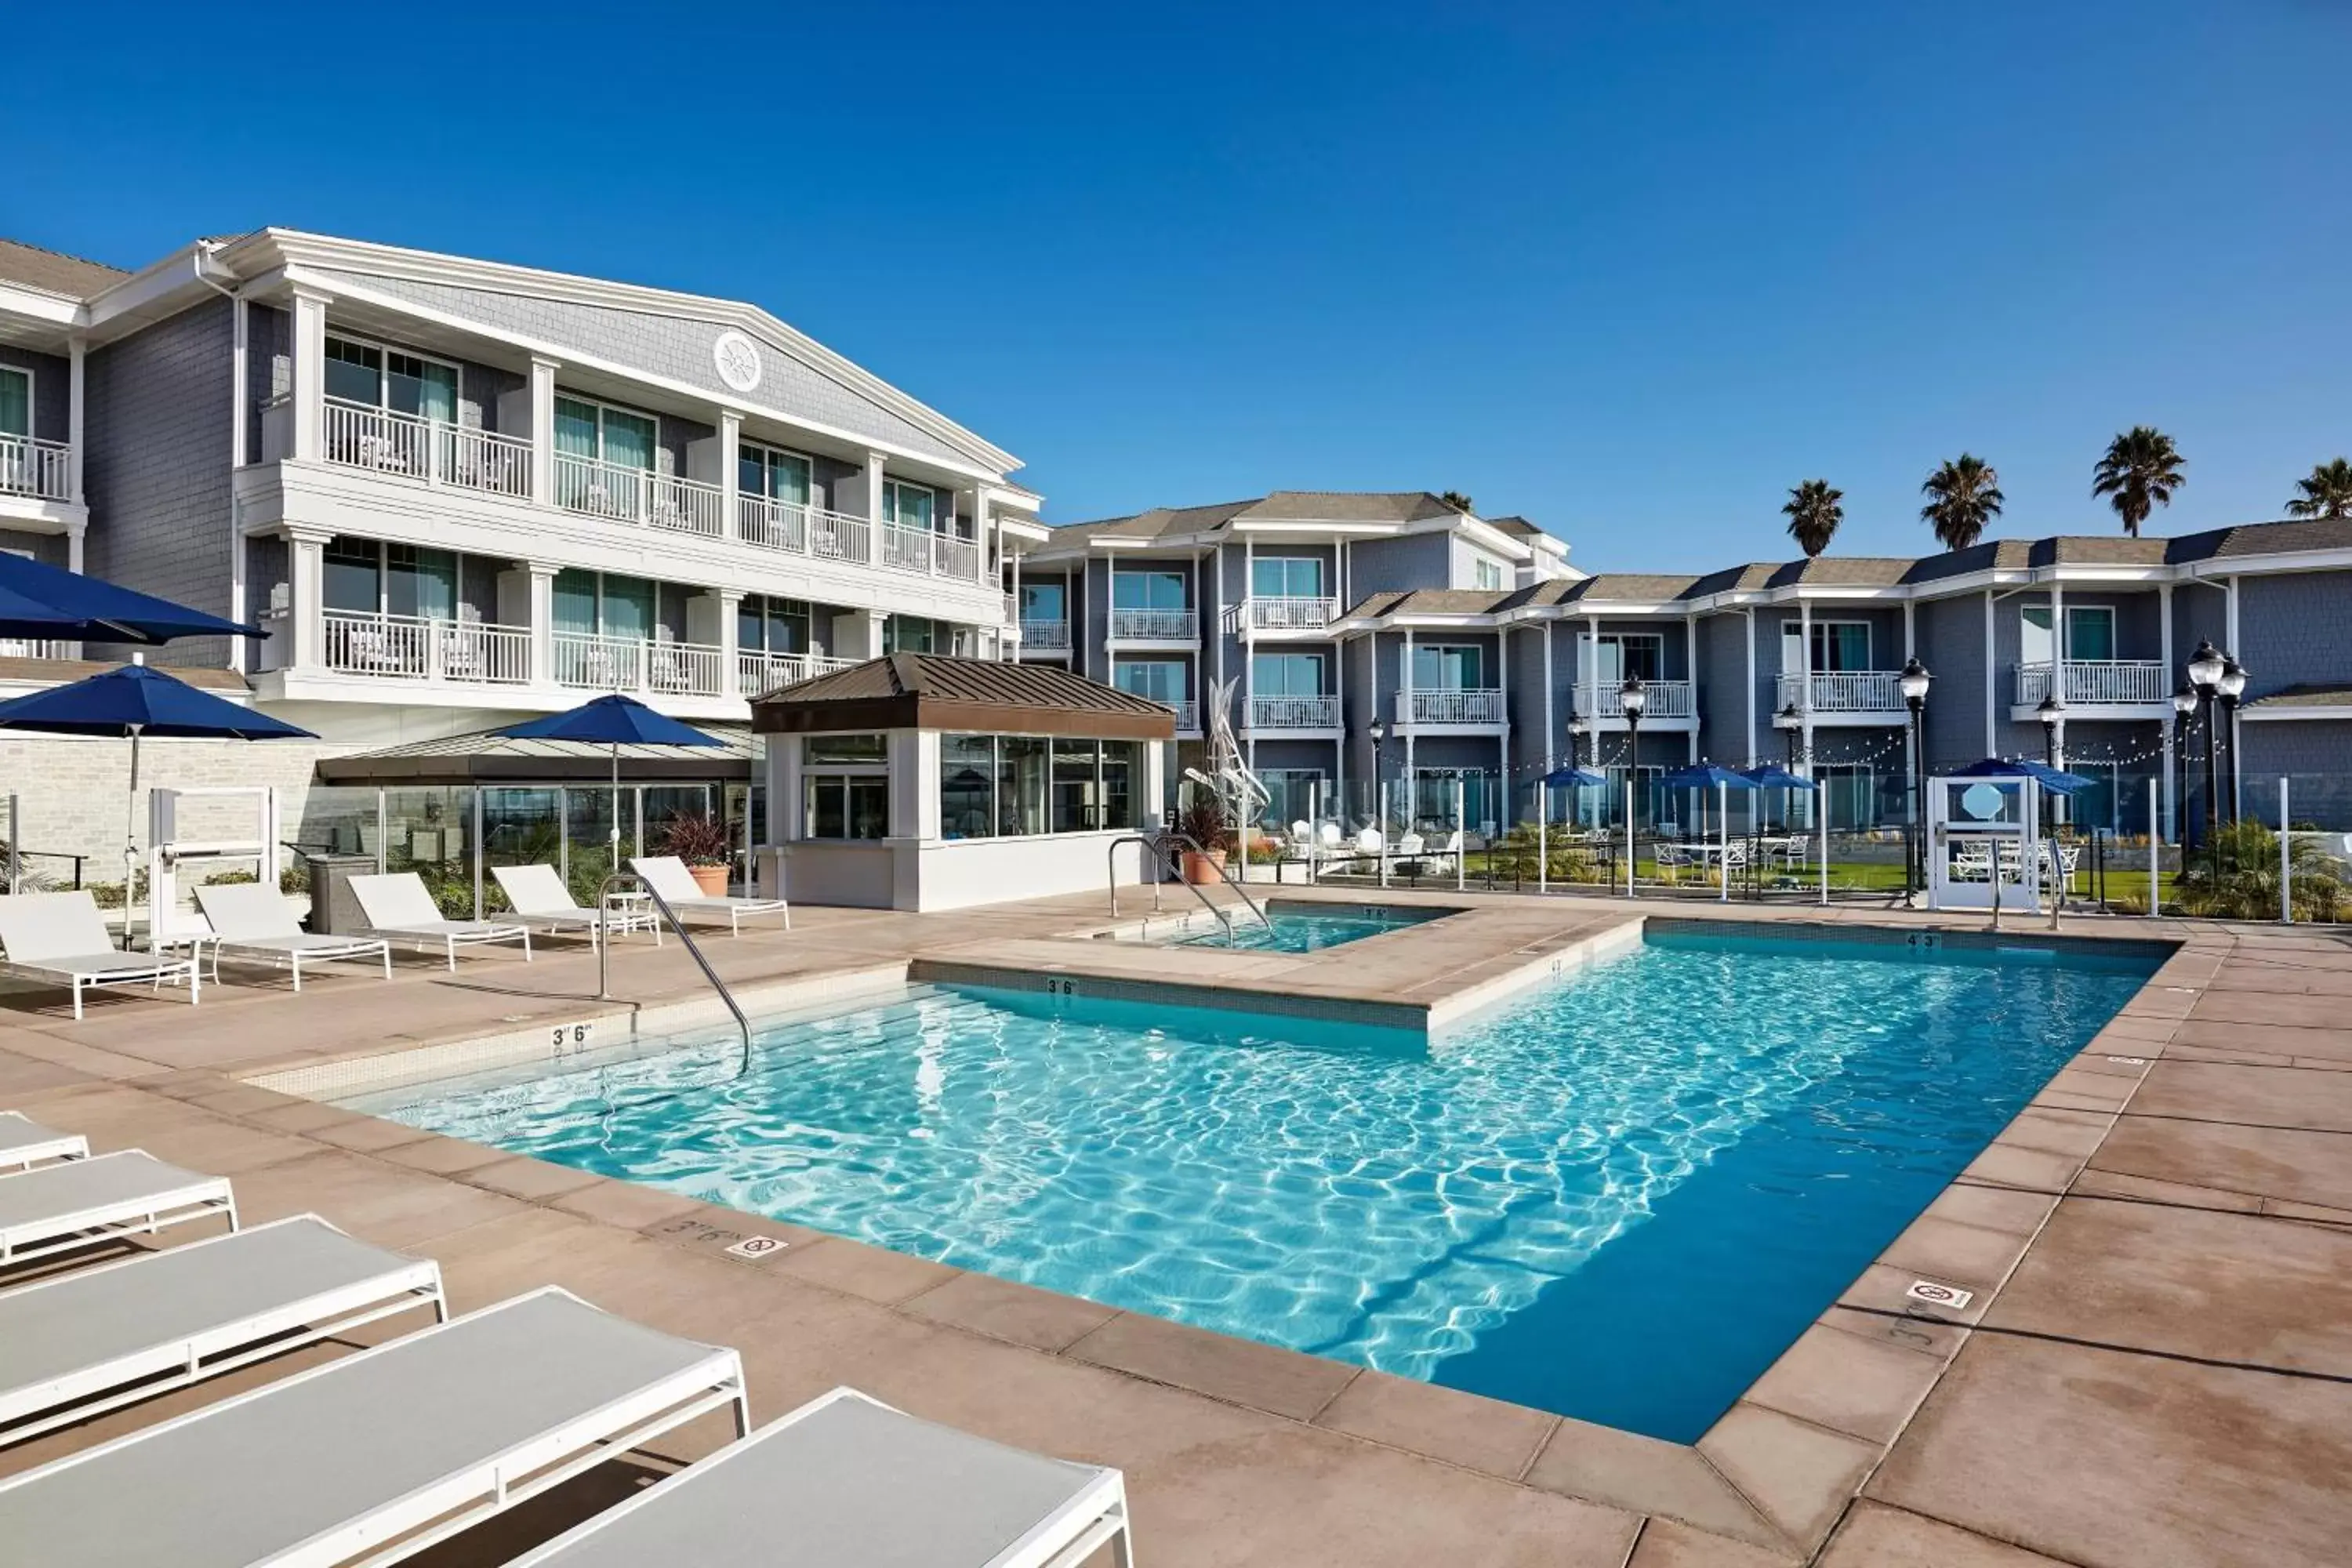 Swimming Pool in Vespera Resort on Pismo Beach, Autograph Collection